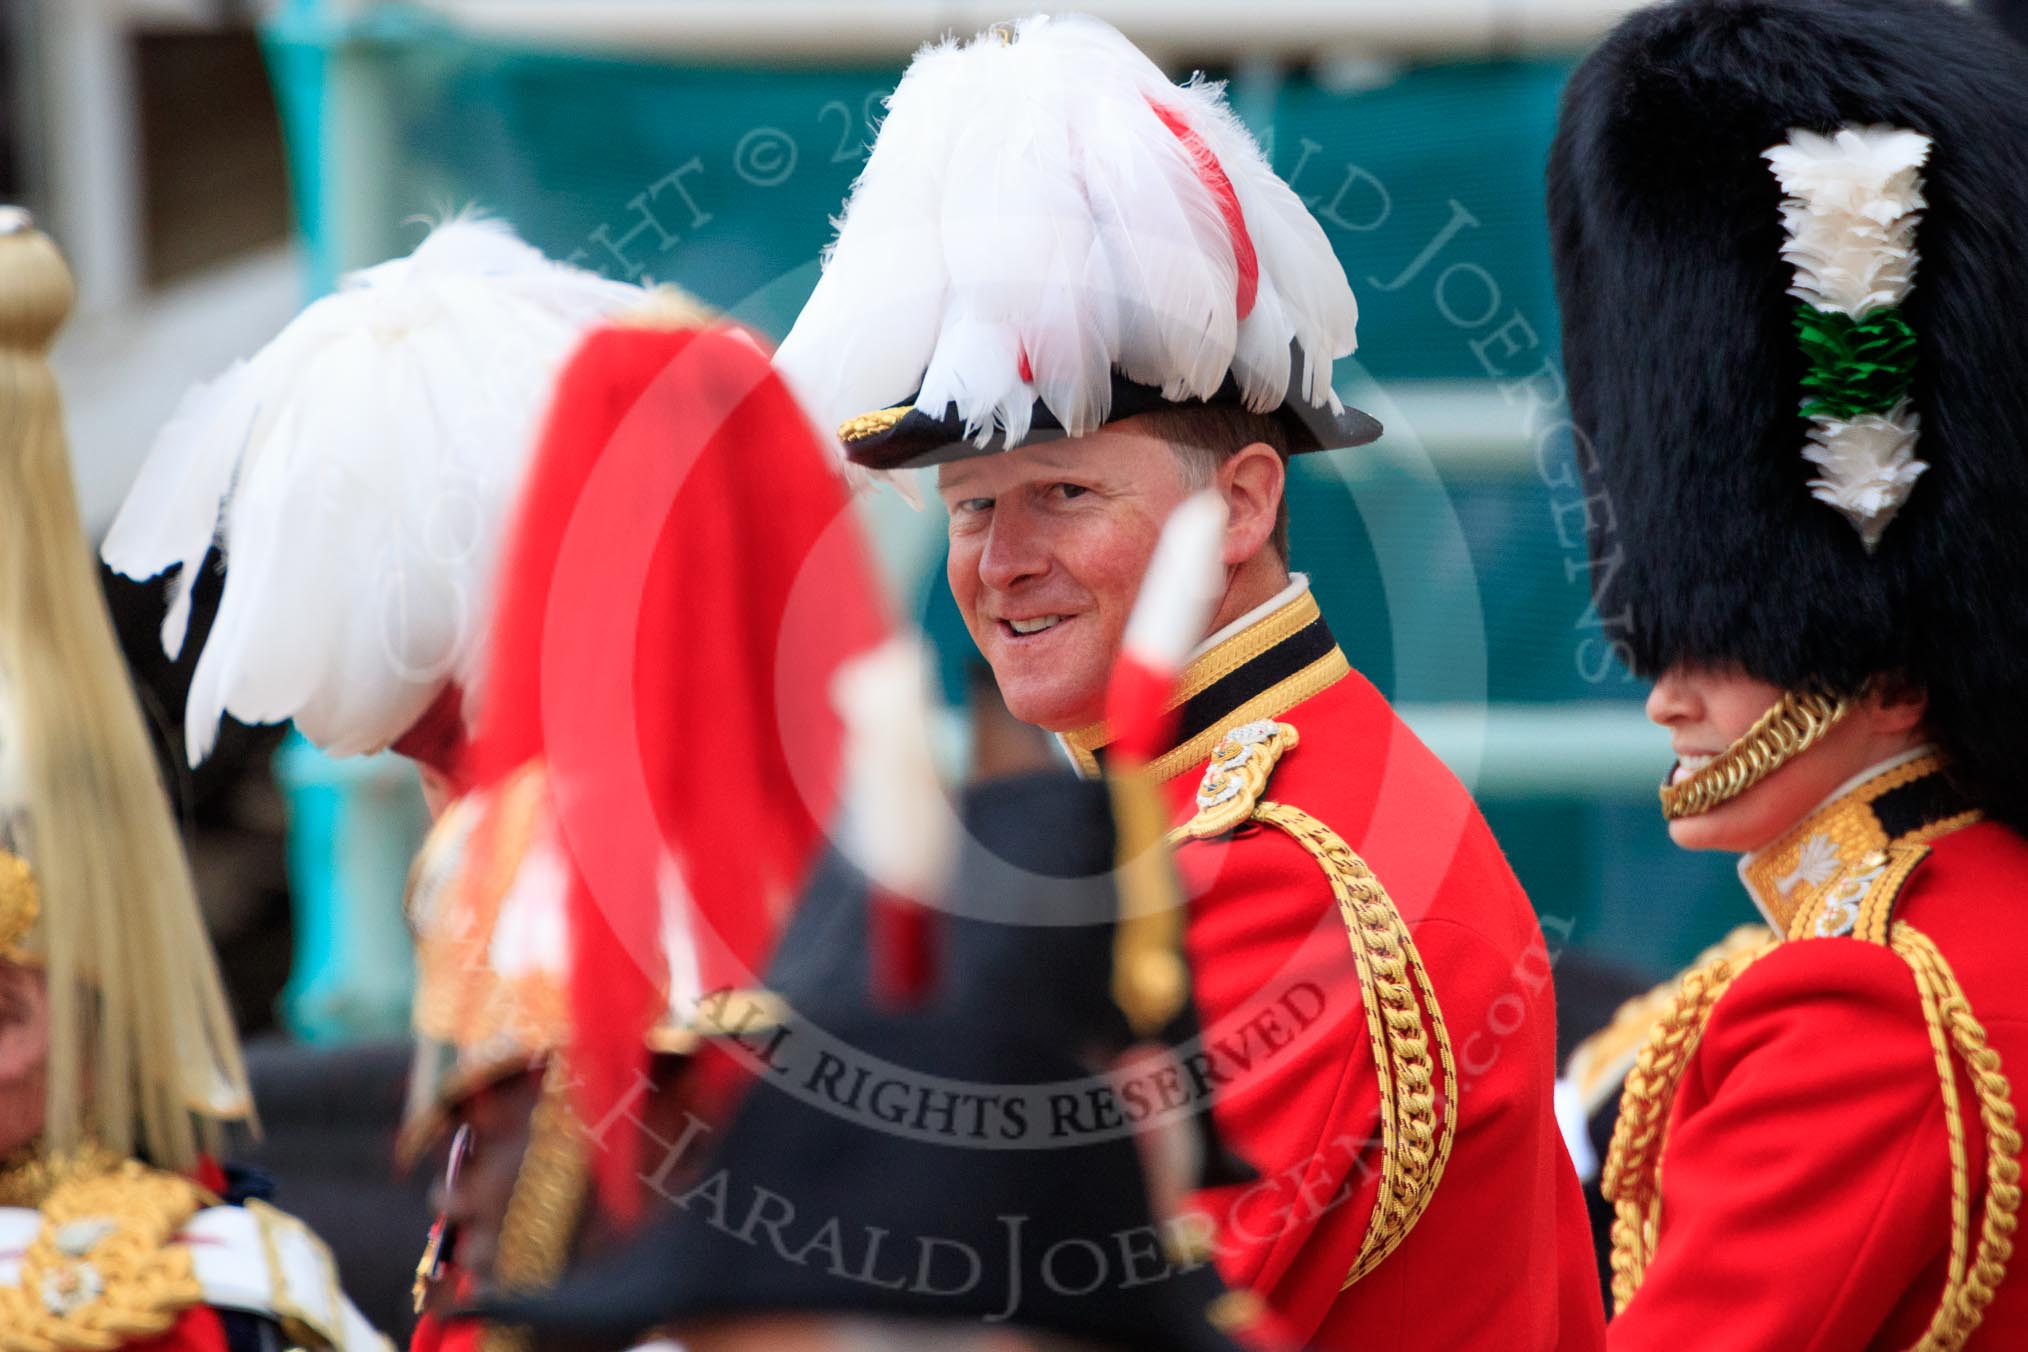 during The Colonel's Review {iptcyear4} (final rehearsal for Trooping the Colour, The Queen's Birthday Parade)  at Horse Guards Parade, Westminster, London, 2 June 2018, 11:07.